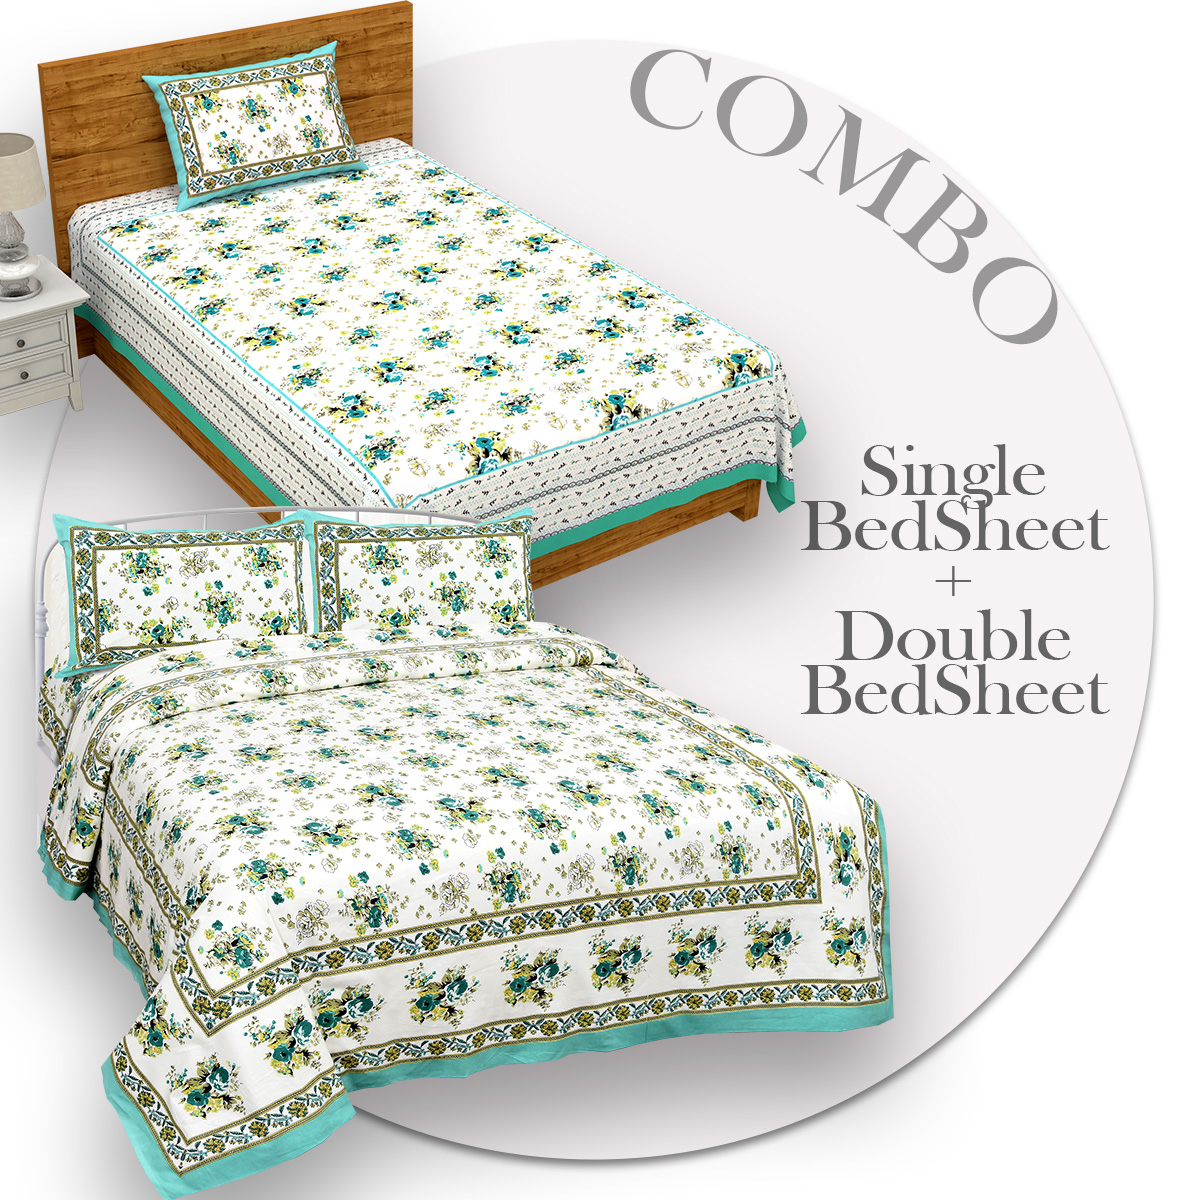 COMBO370 Beautiful Sea Green Colour Combo Set of 1 Single and 1 Double Bedsheet With 3 Pillow Cover